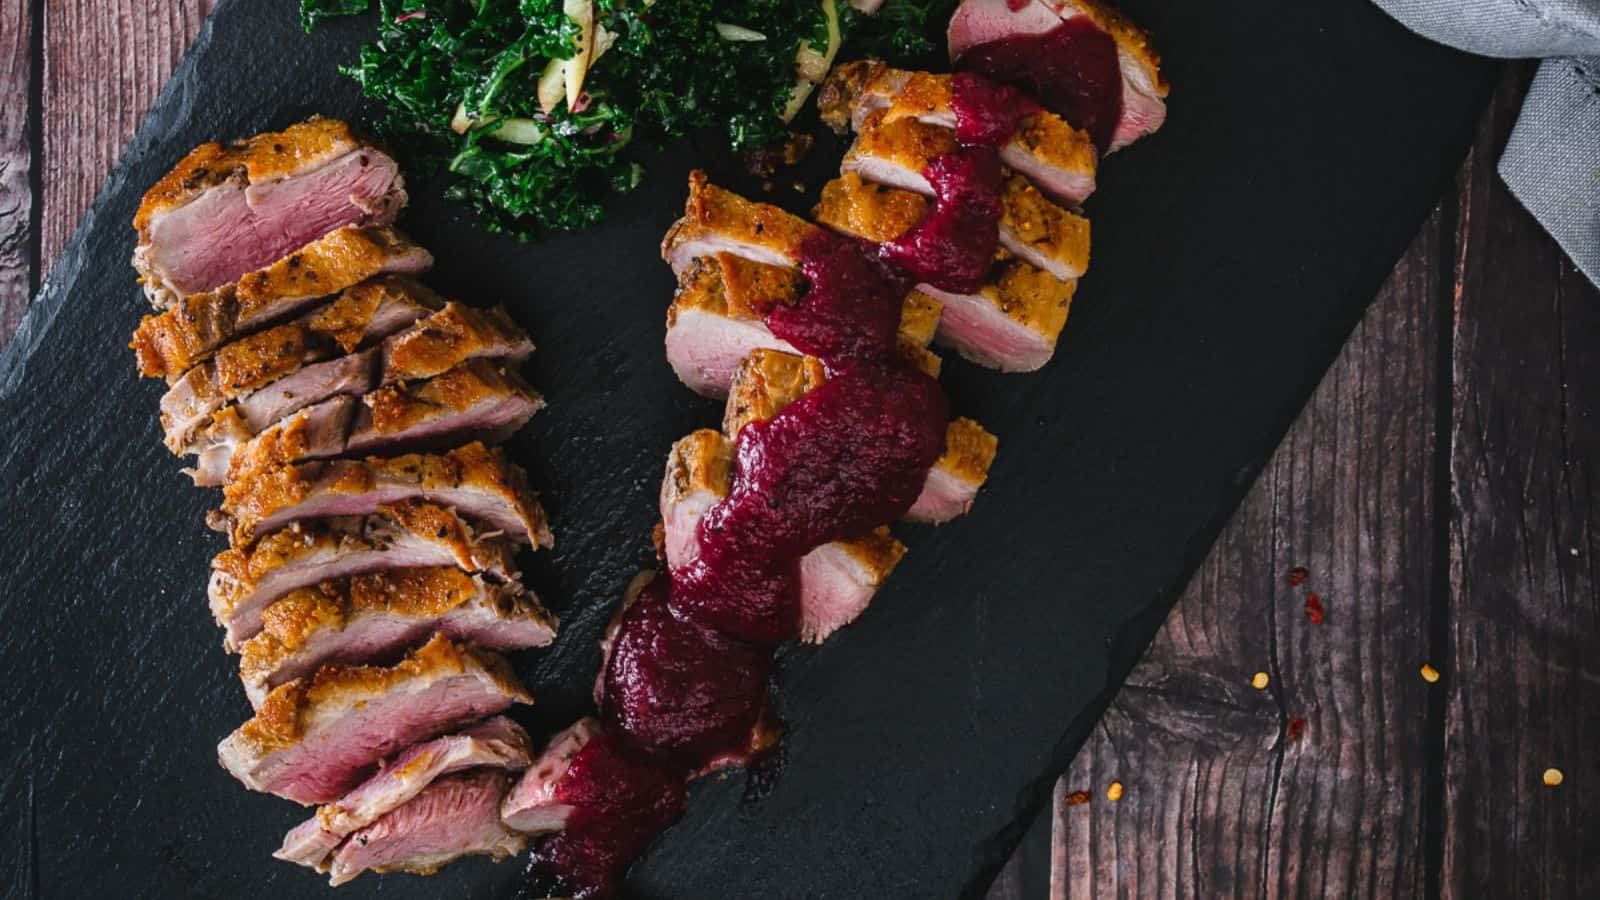 Overhead view of sliced duck breast with berry sauce.